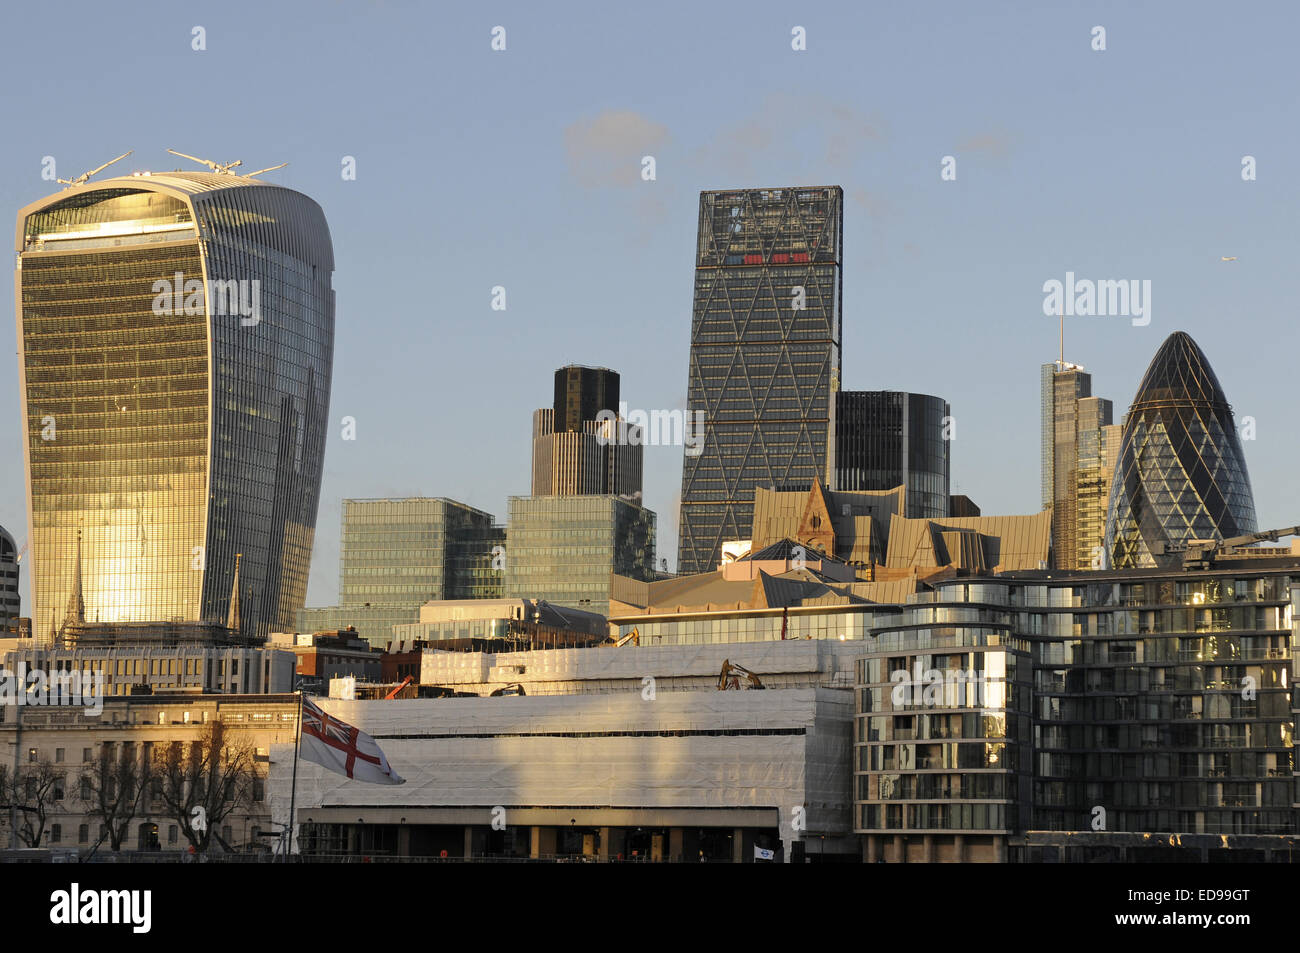 The Modern skyline of the City of London with The Walkie Talkie Building, The Gherkin, The Cheesegrater at sundown London Stock Photo